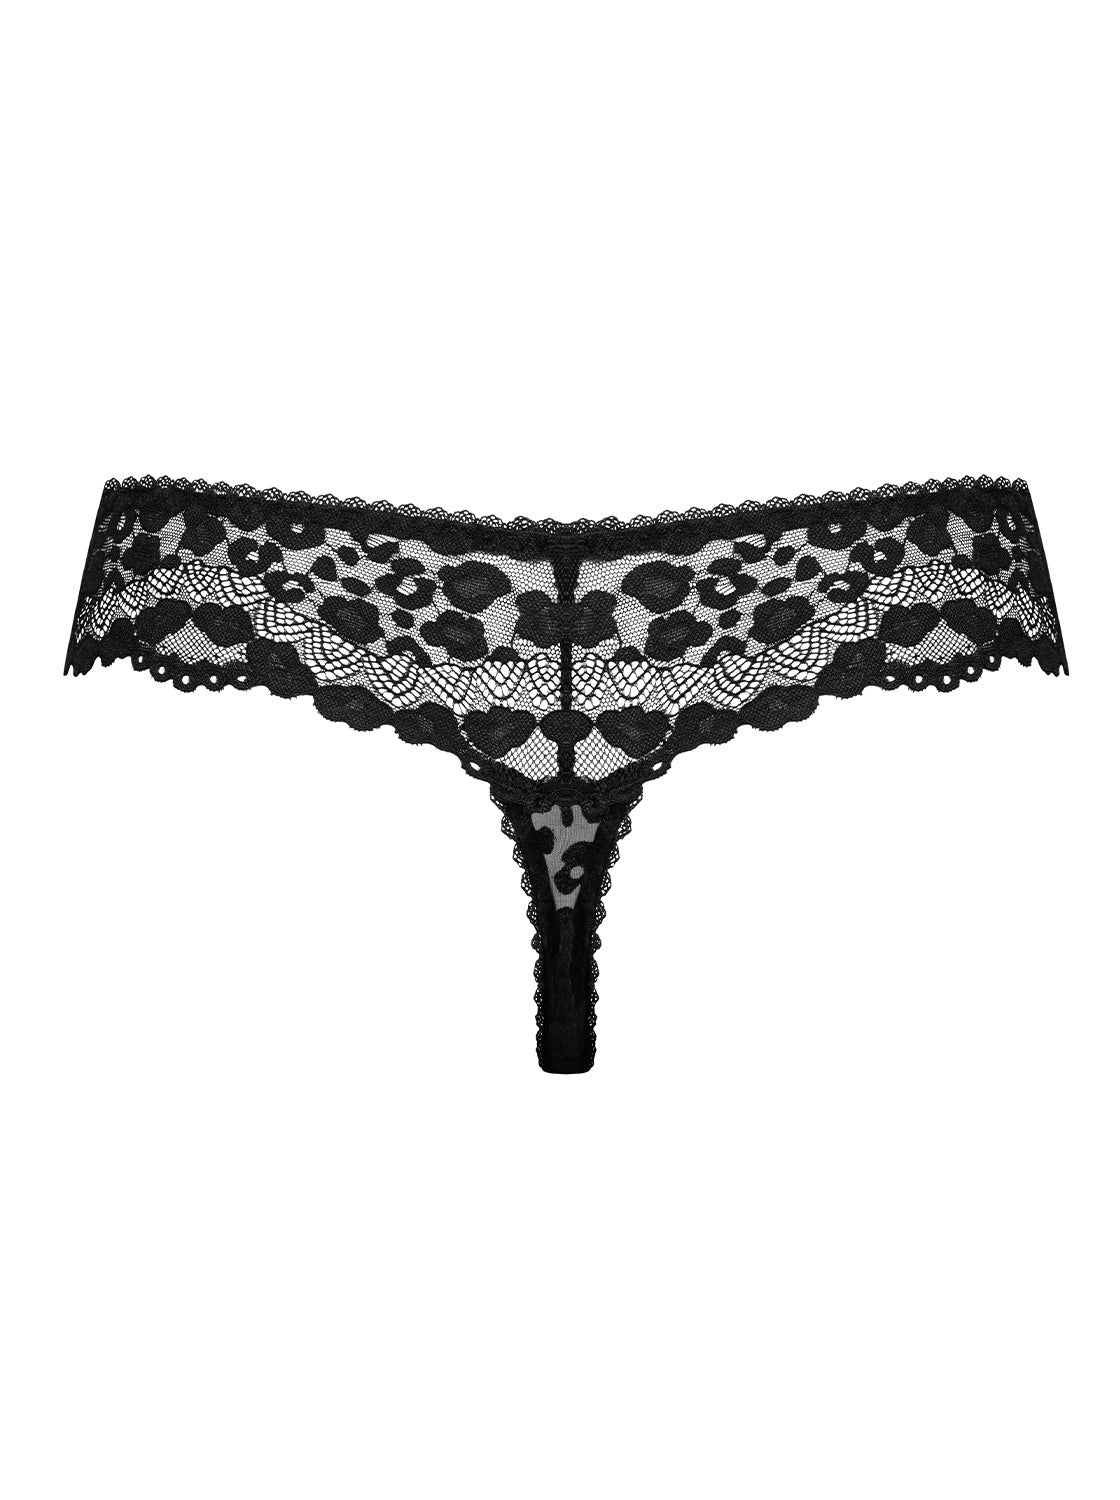 Giully Classic cut string made of transparent and elastic material with animal print made of velvet